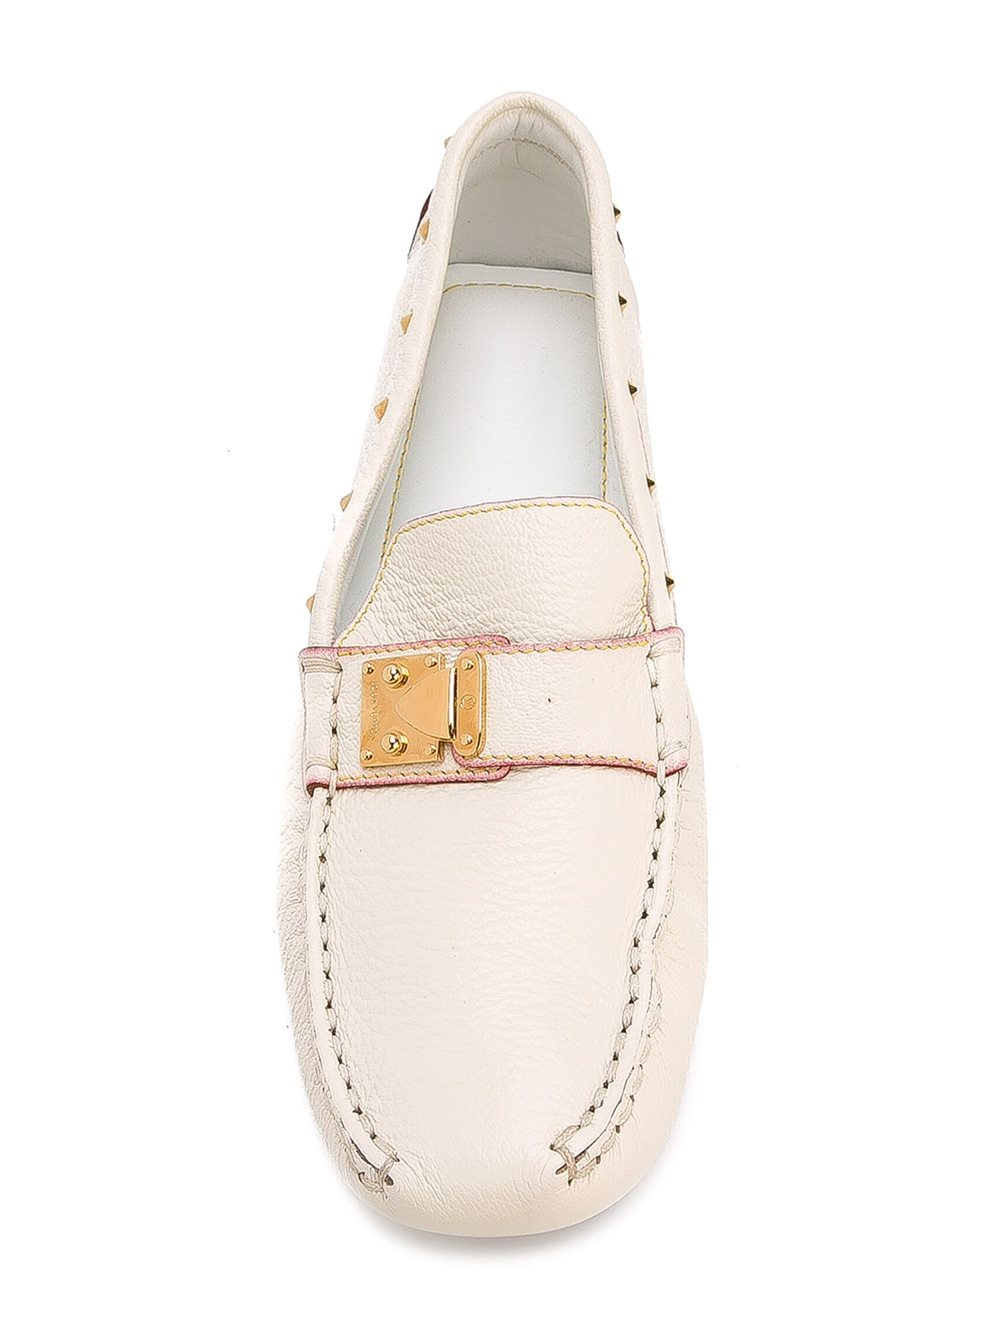 Lyst - Louis Vuitton Studded Loafers in White